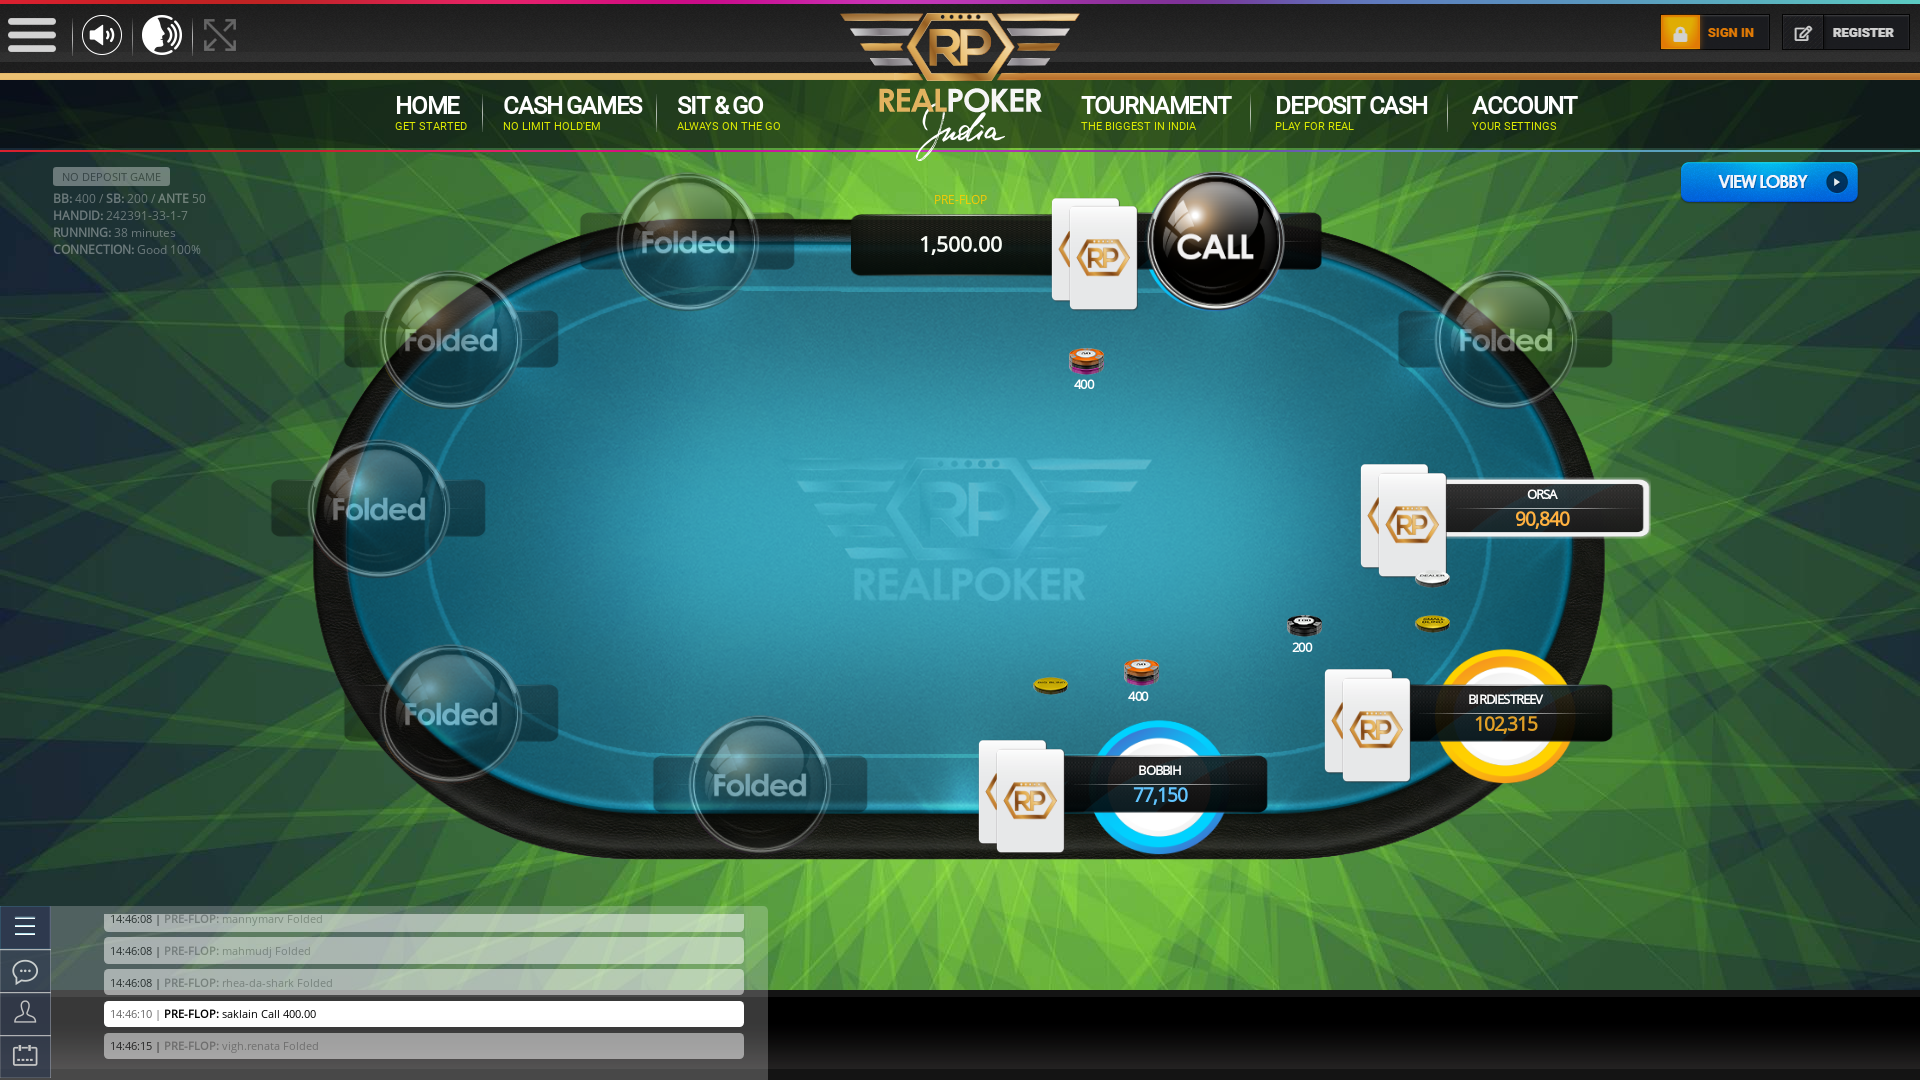 Indian online poker on a 10 player table in the 38th minute match up